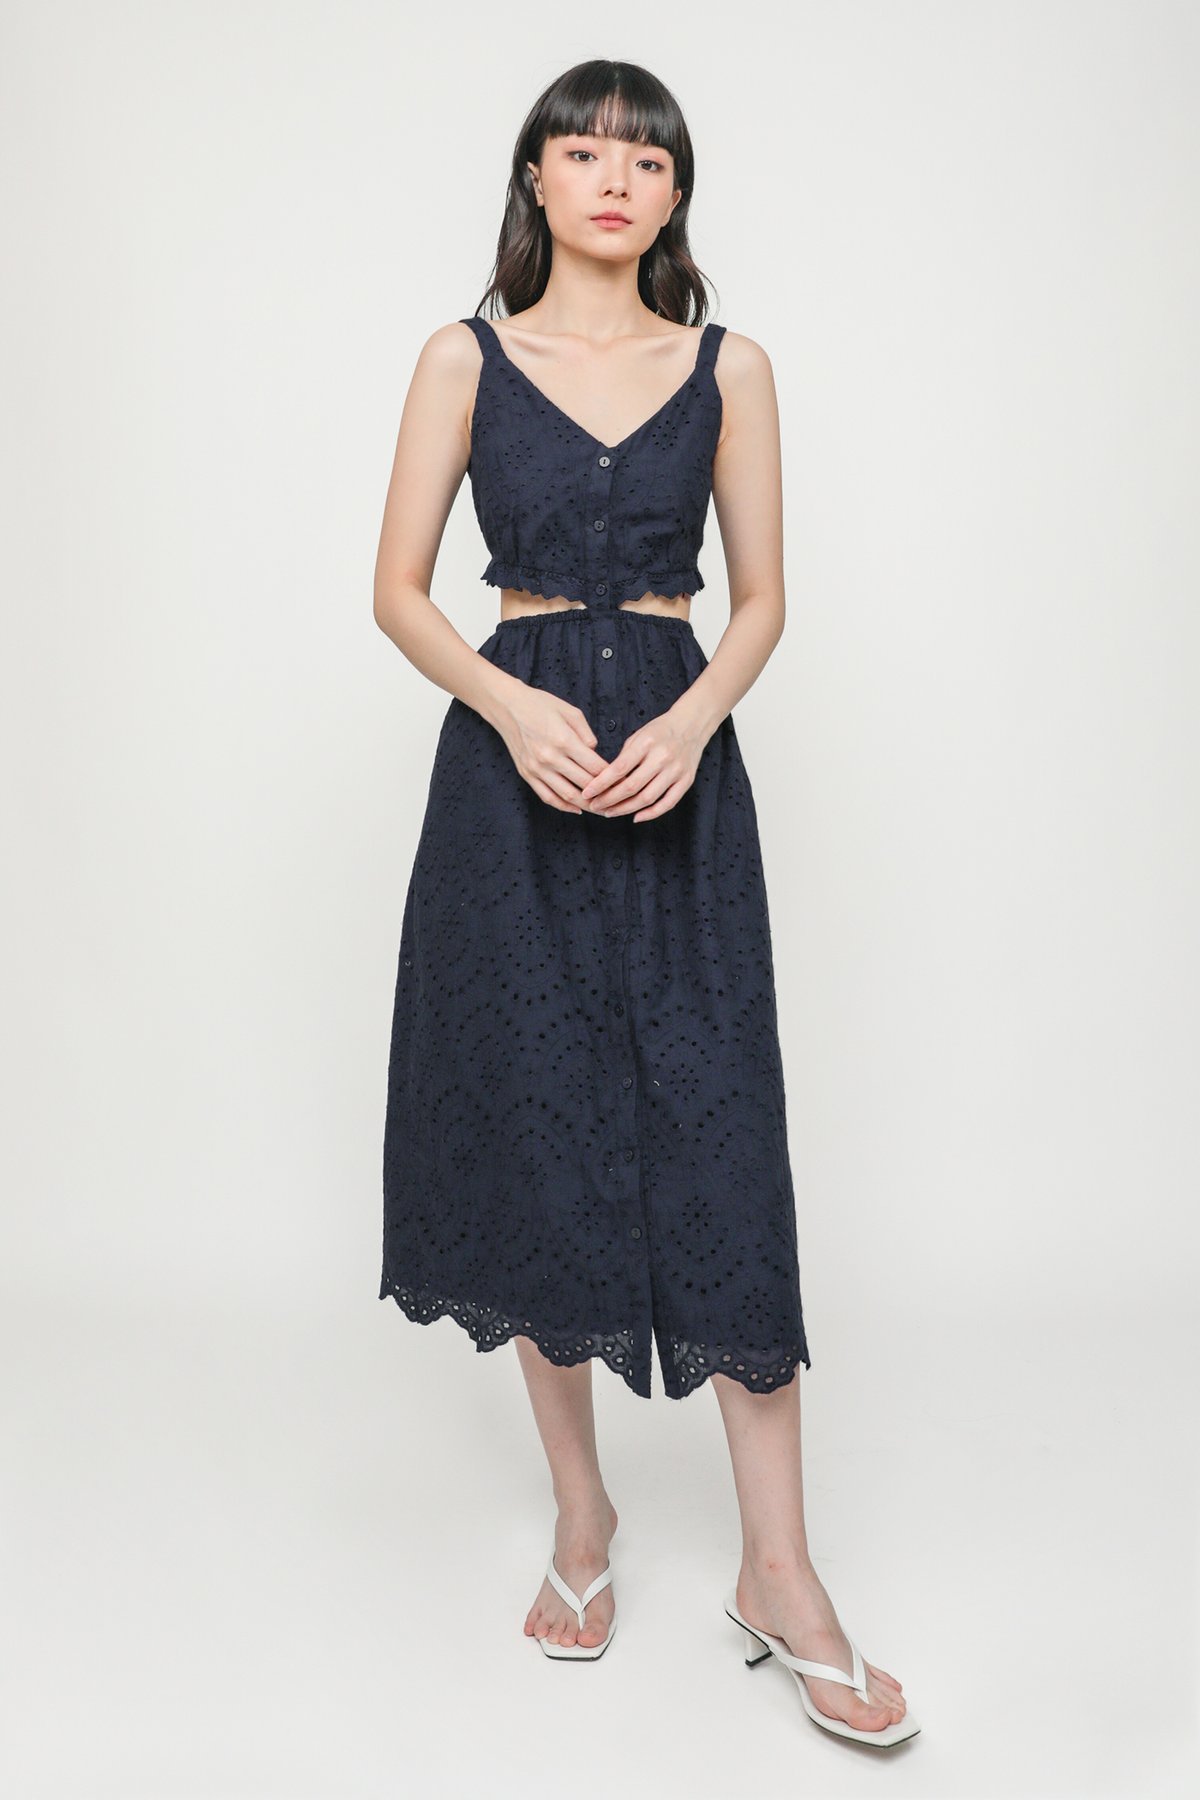 Serenity Eyelet Button Cut Out Dress (Navy)